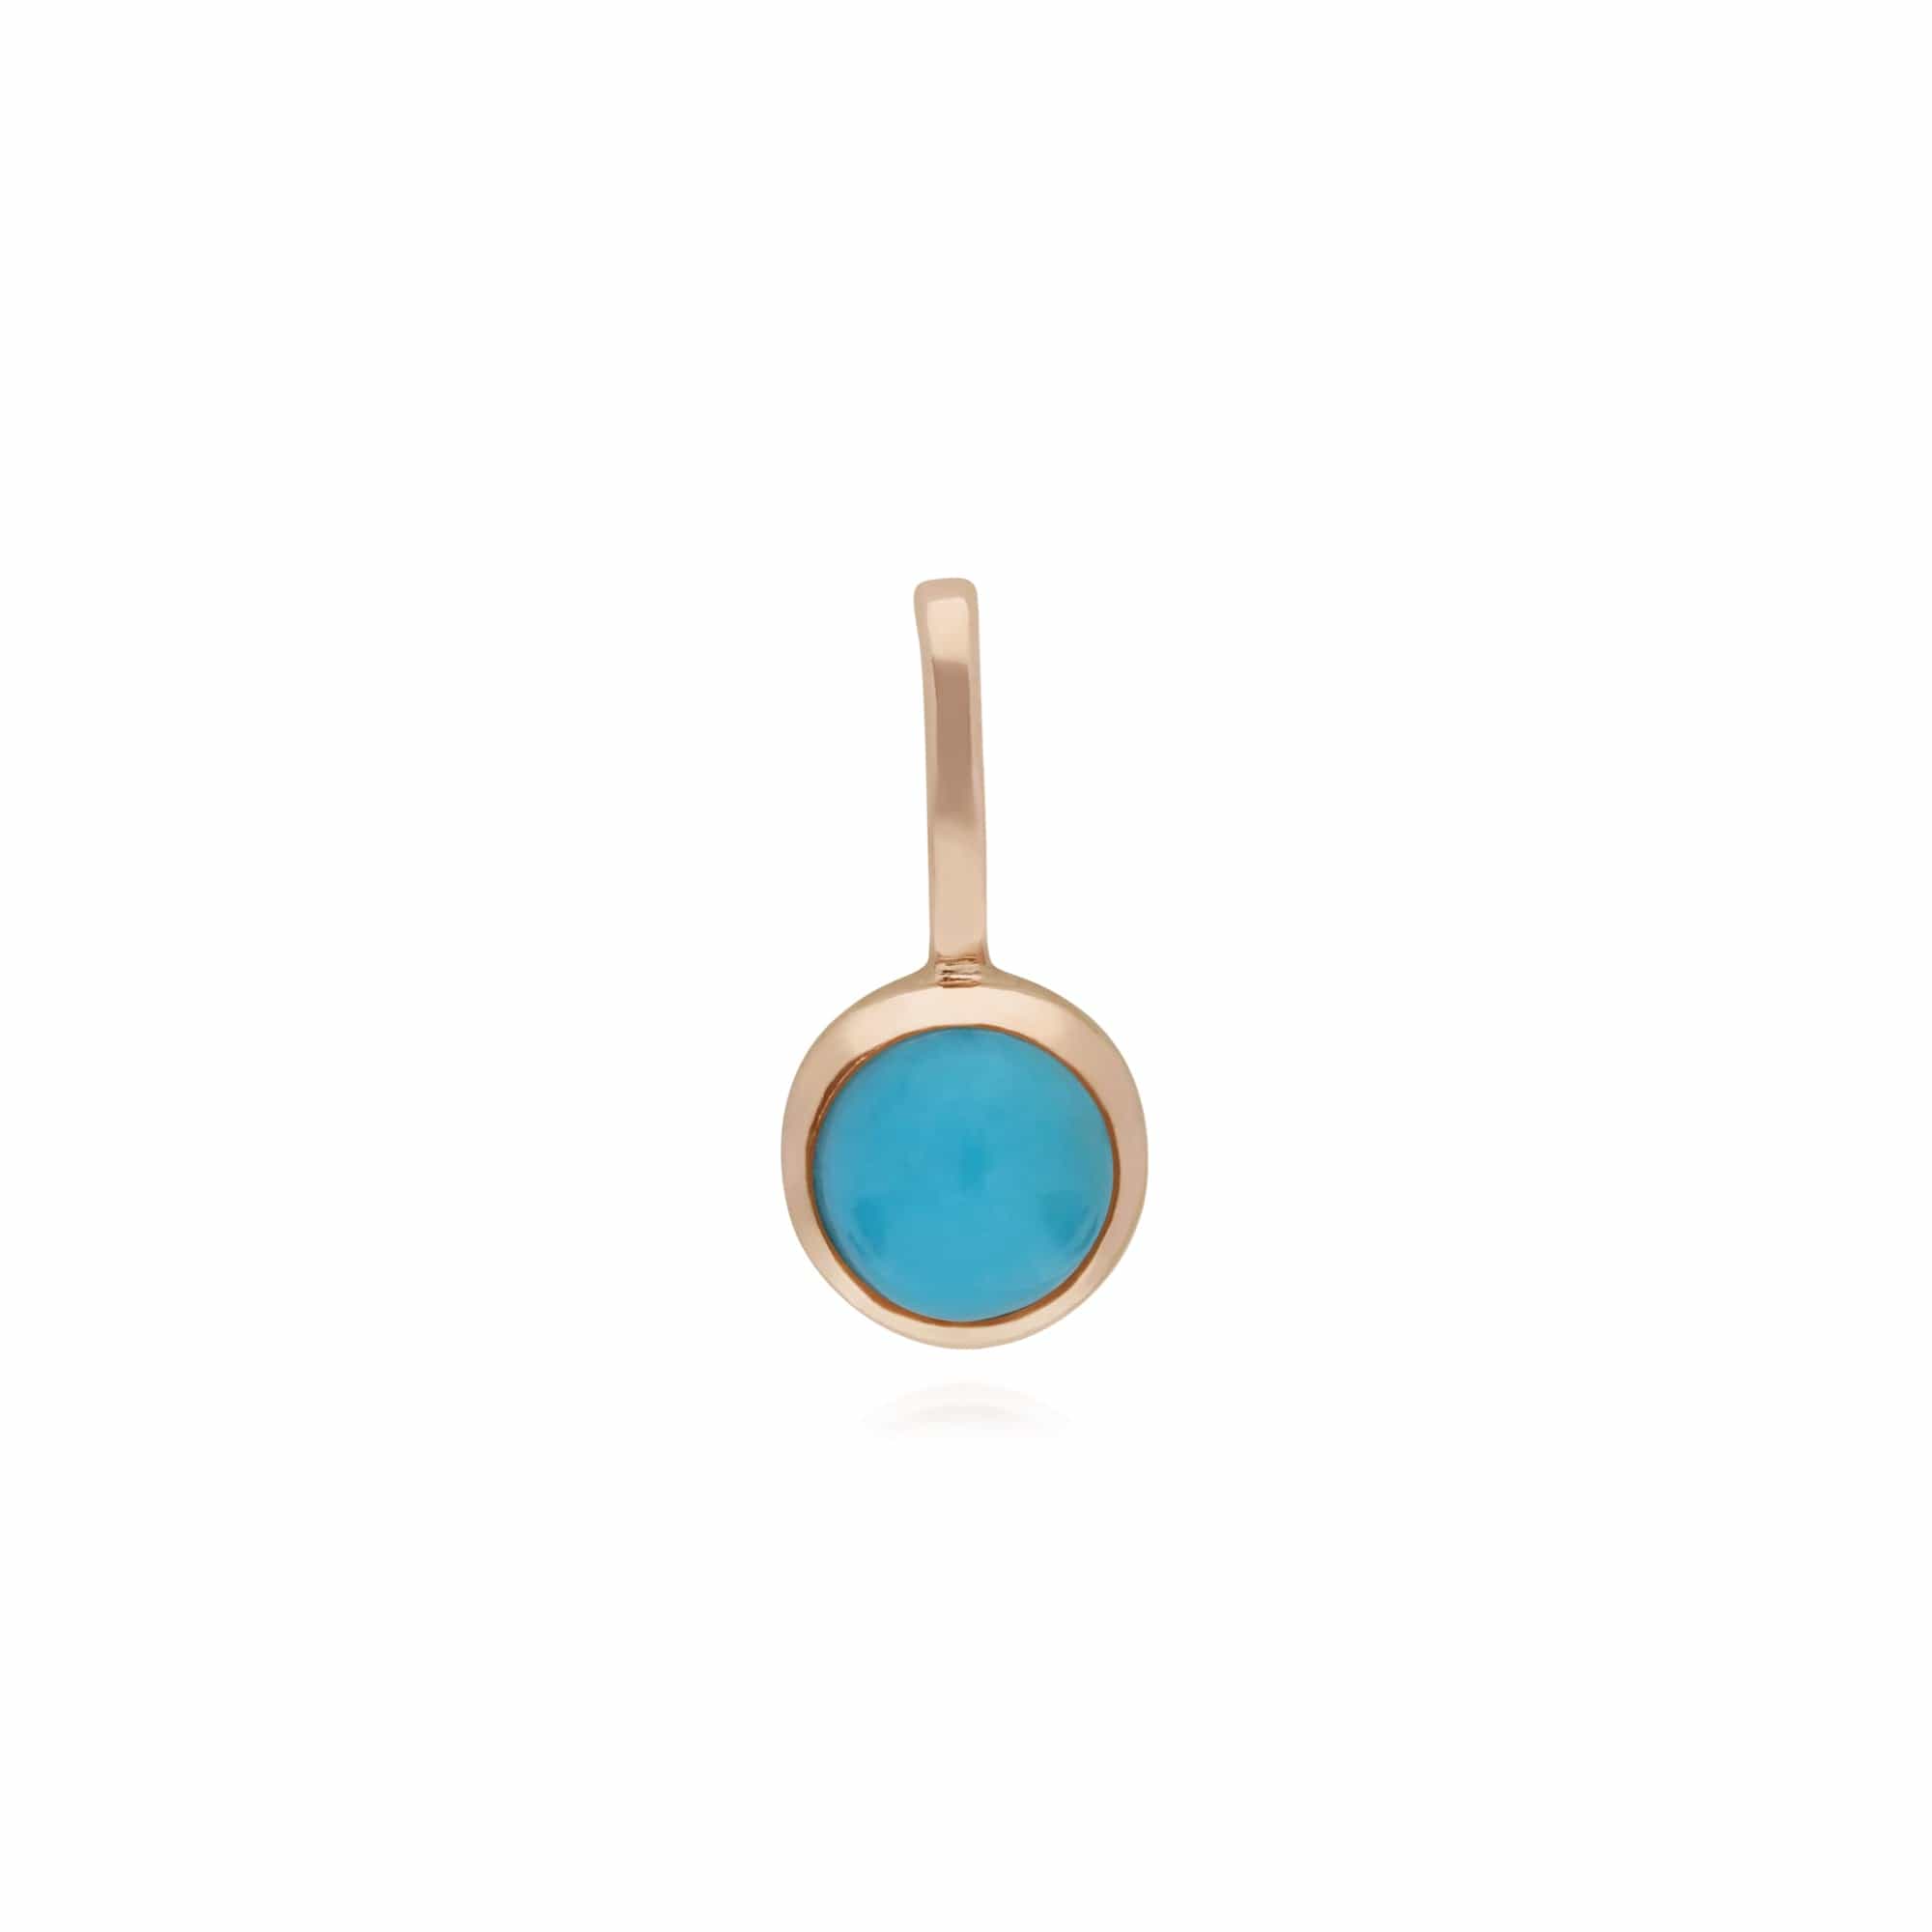 Gemondo Rose Gold Plated Sterling Silver Turquoise Charm - Gemondo